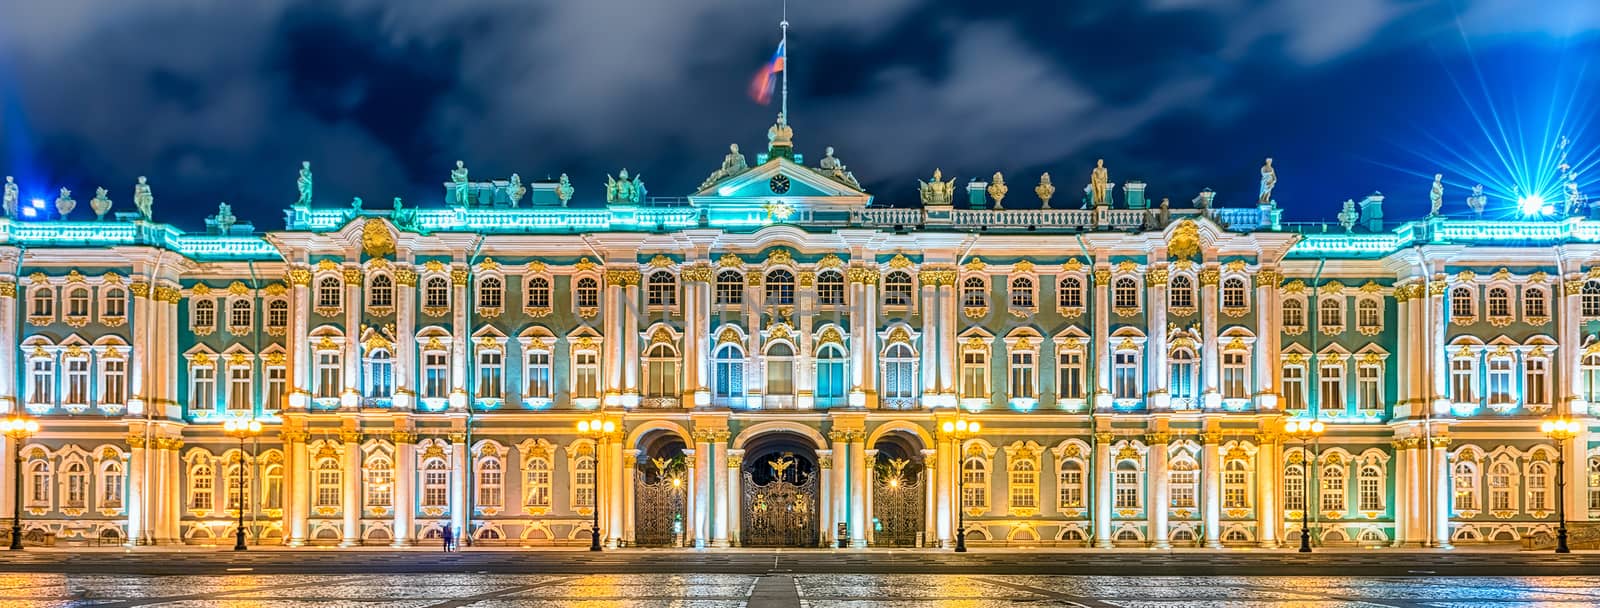 Facade of the Winter Palace, Hermitage Museum, St. Petersburg, R by marcorubino